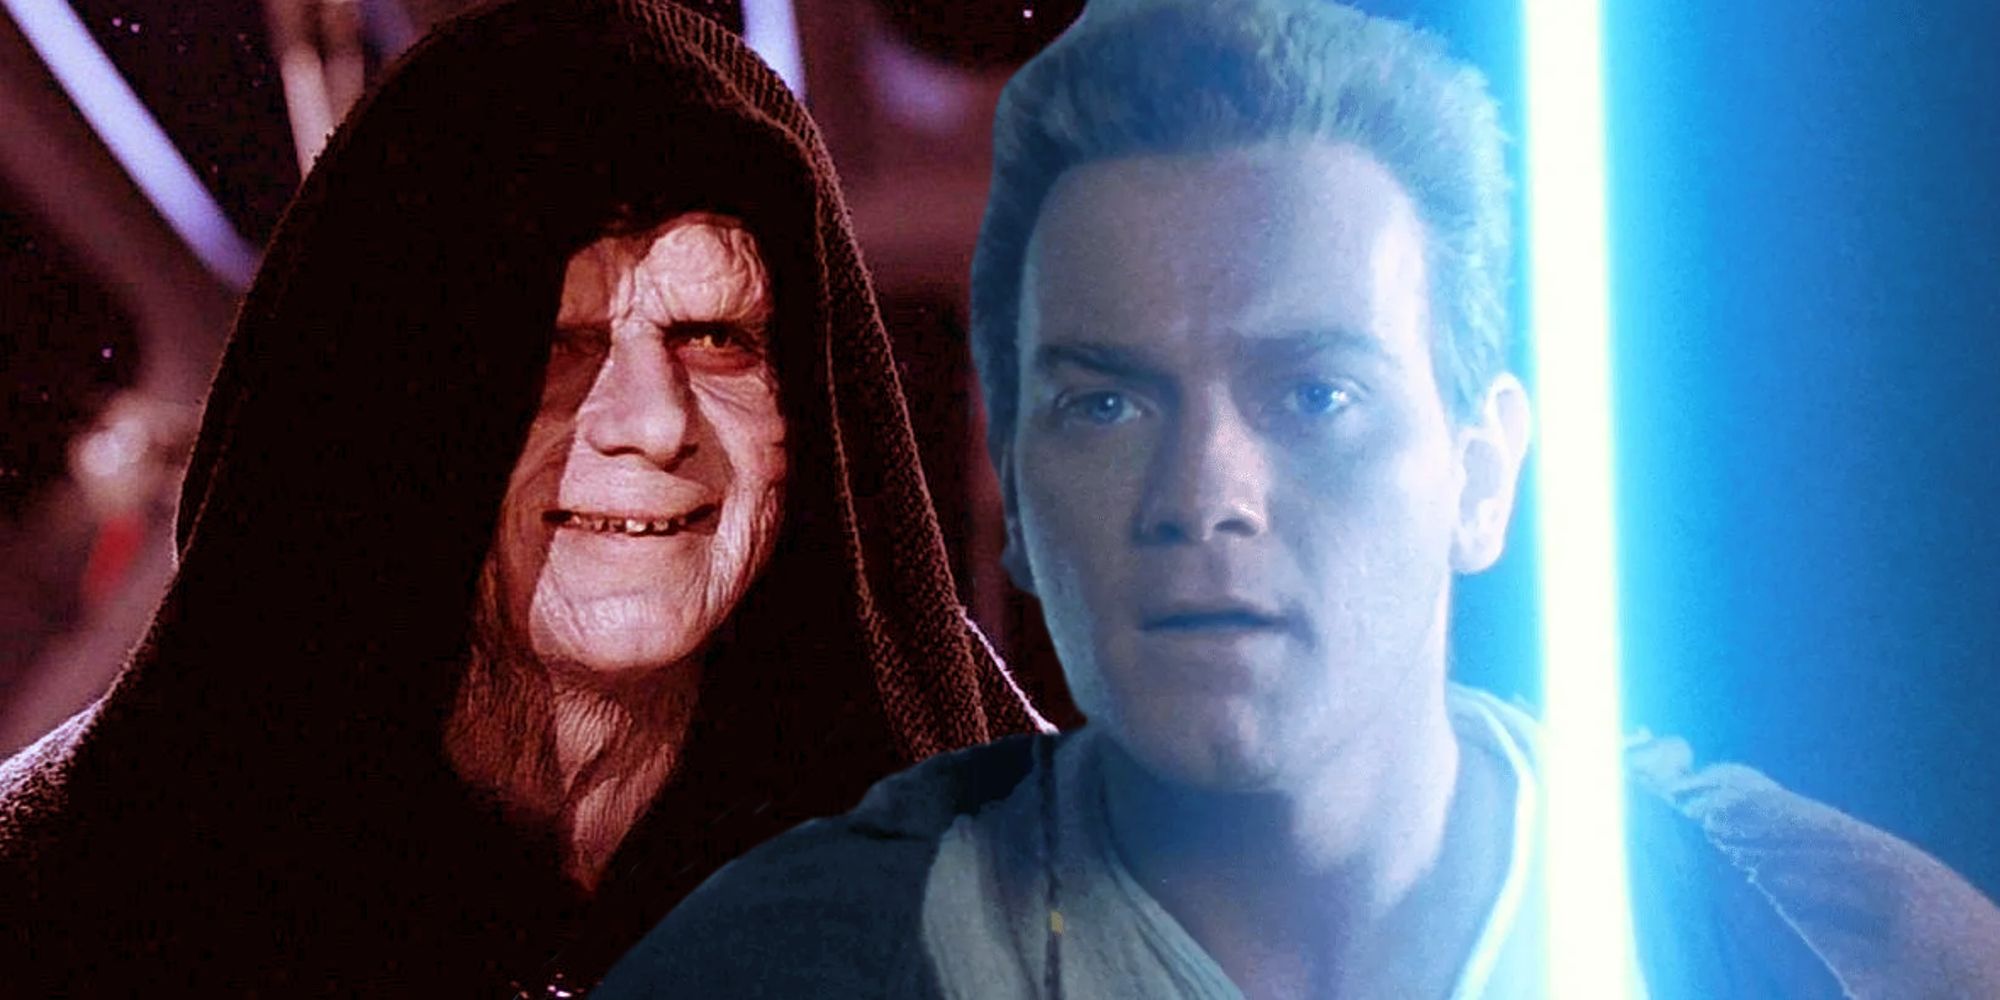 Palpatine smiling with a red filter next to Obi-Wan wielding his lightsaber in Star Wars